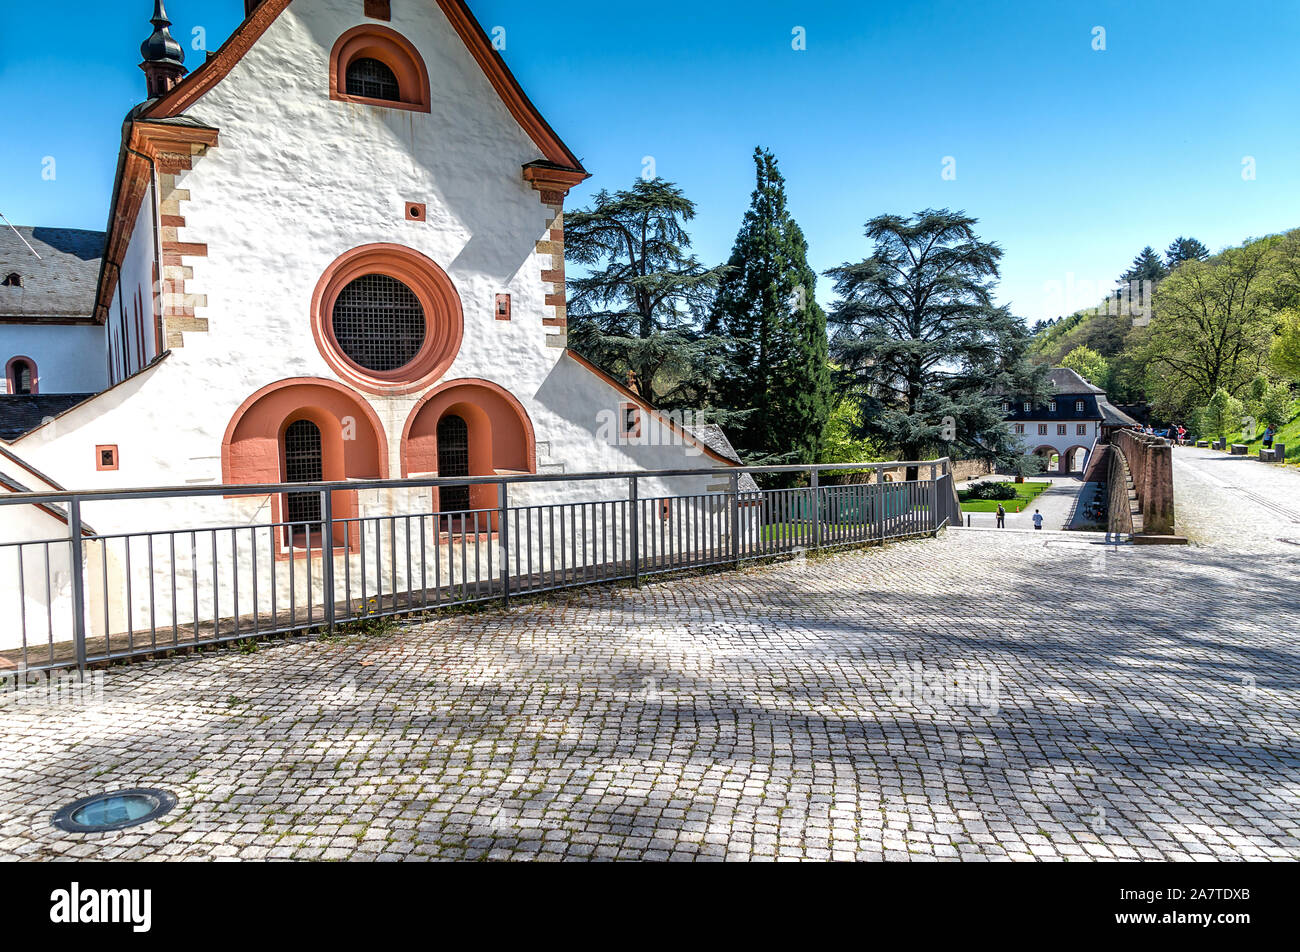 Historic Eberbach Abbey, Mystic heritage of the Cistercian monks in Rheingau, filming location for the movie The Name of the Rose,Germany Stock Photo